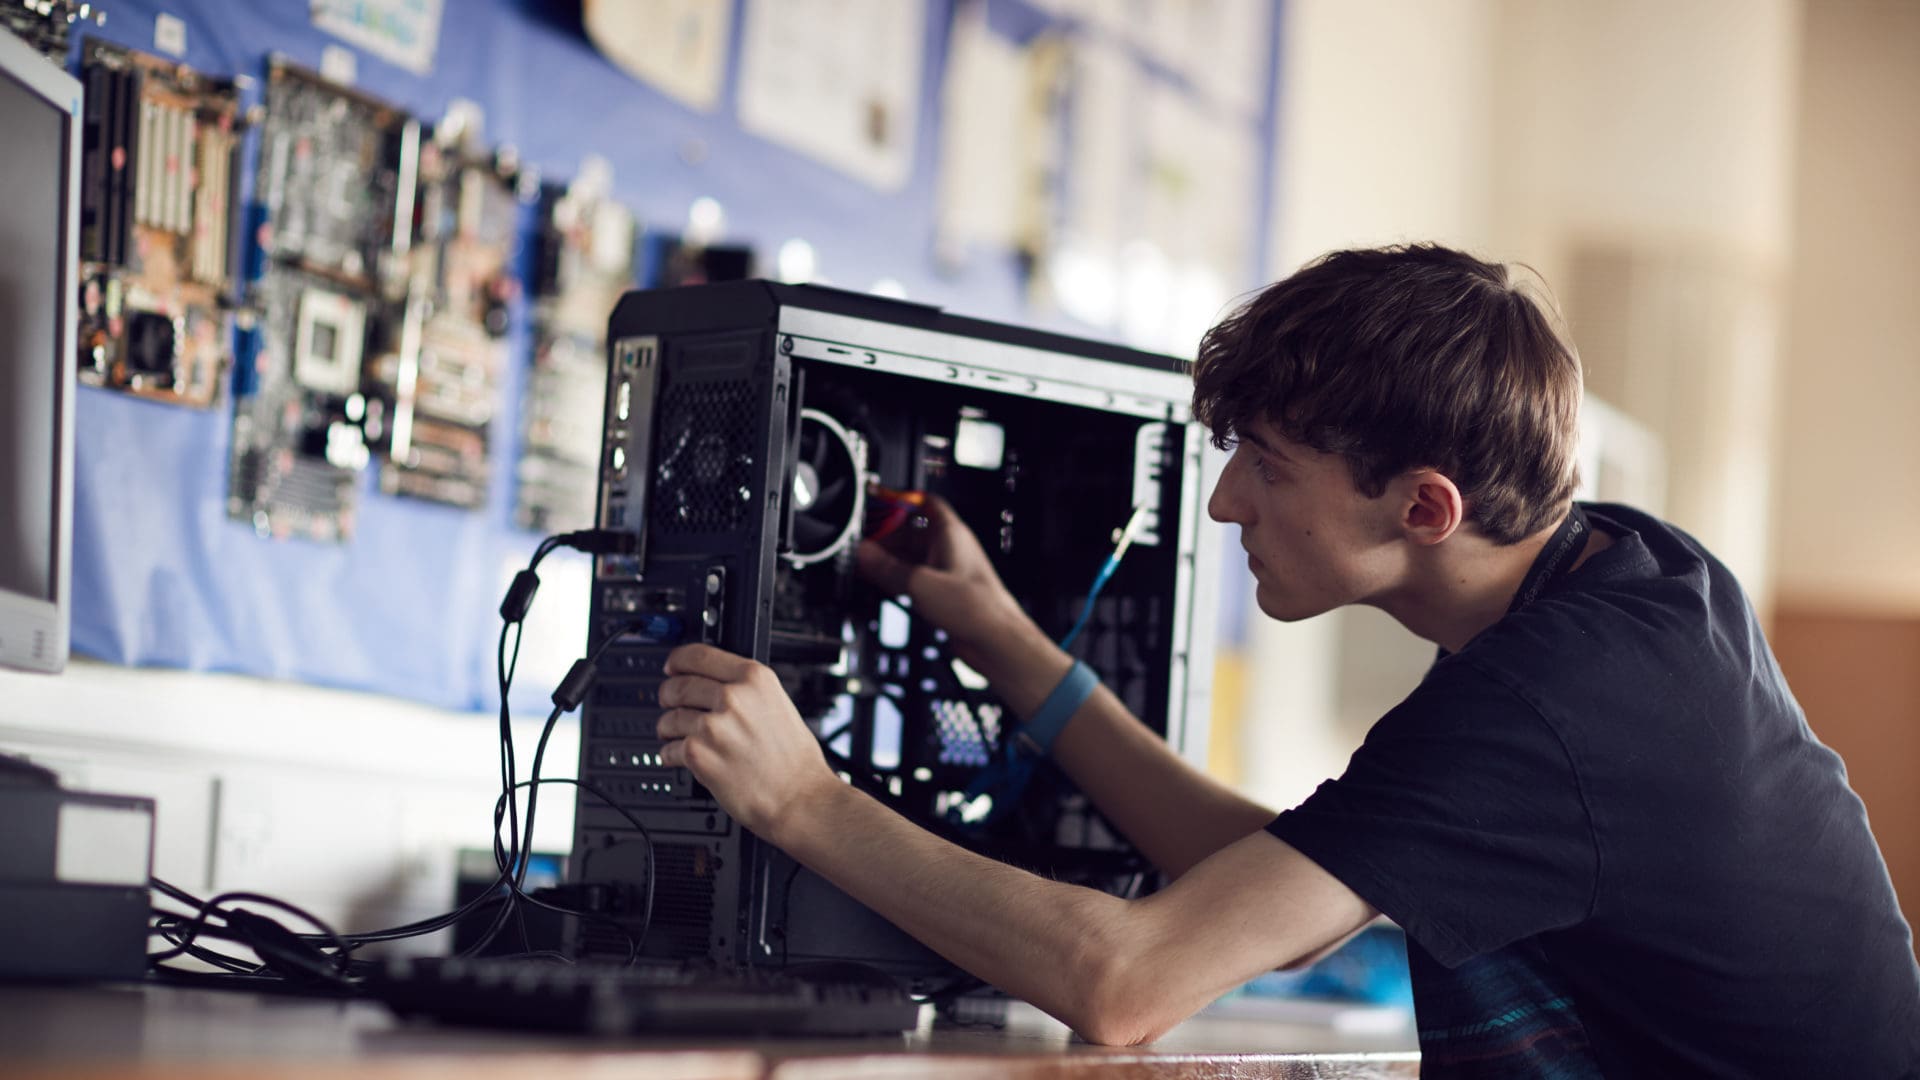  student focusing on fixing a computer on an IT course